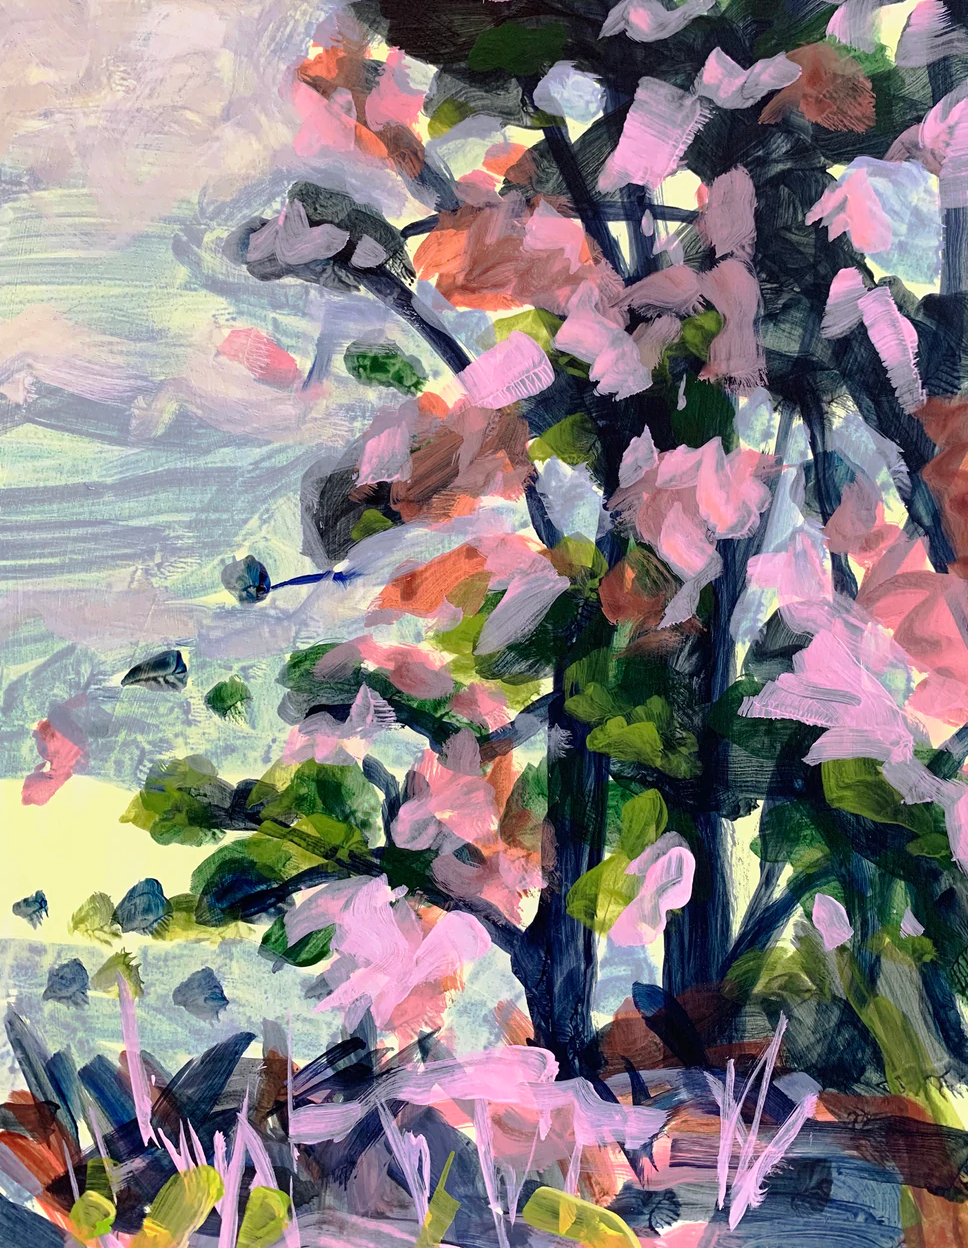 A painting of pink blooms on a tree